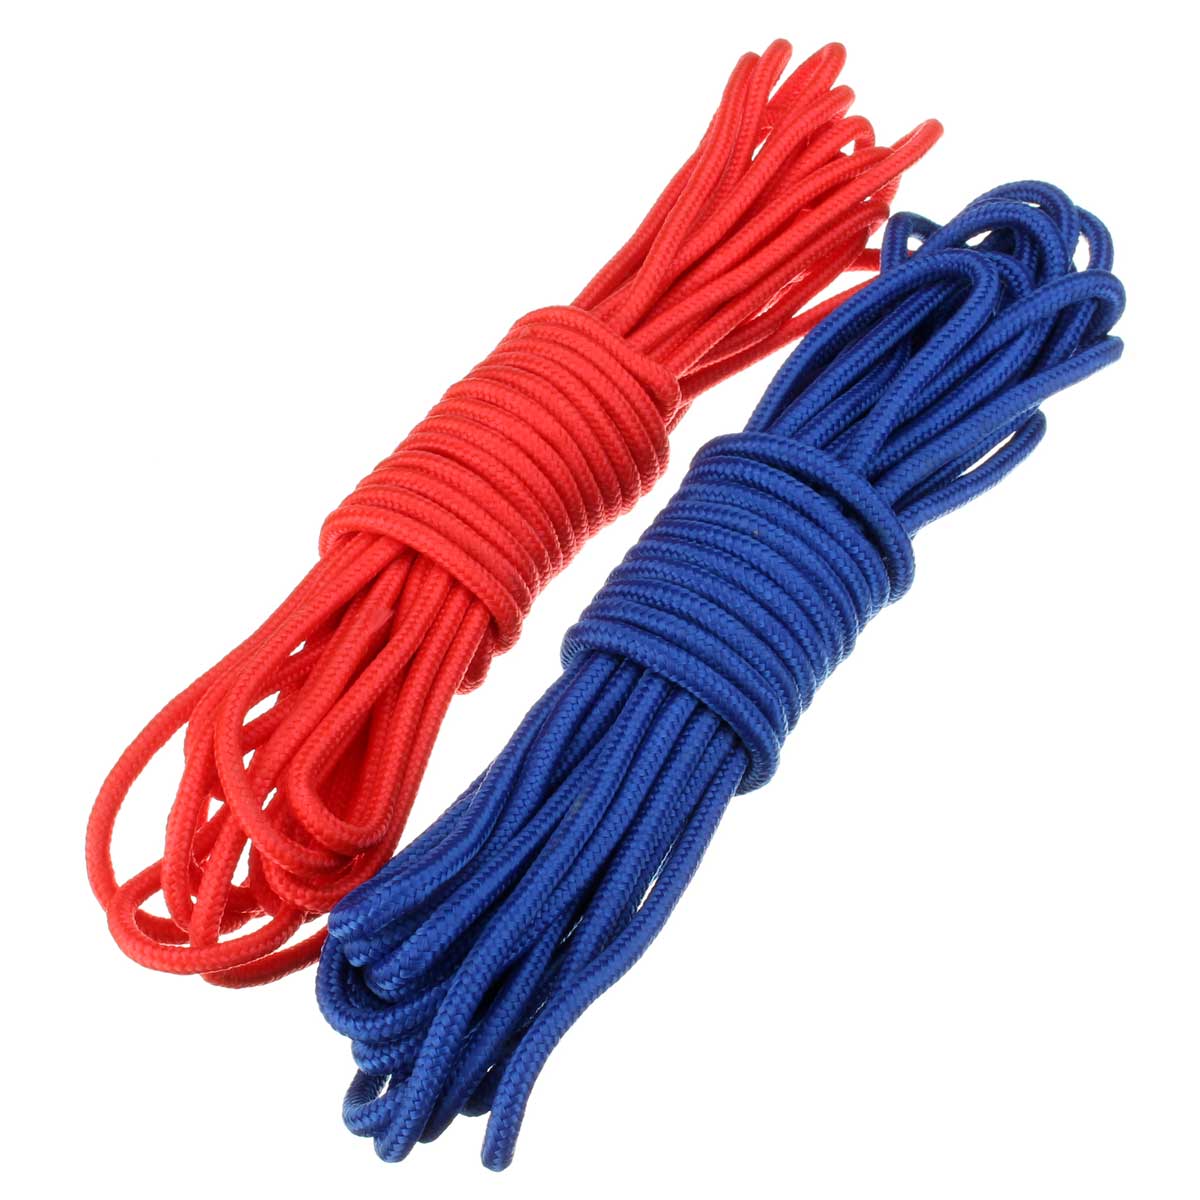 10M-328FT-Lifeline-Climbing-Rope-Paracord-Outdoor-Escape-Survival-Rope-String-Cord-1050559